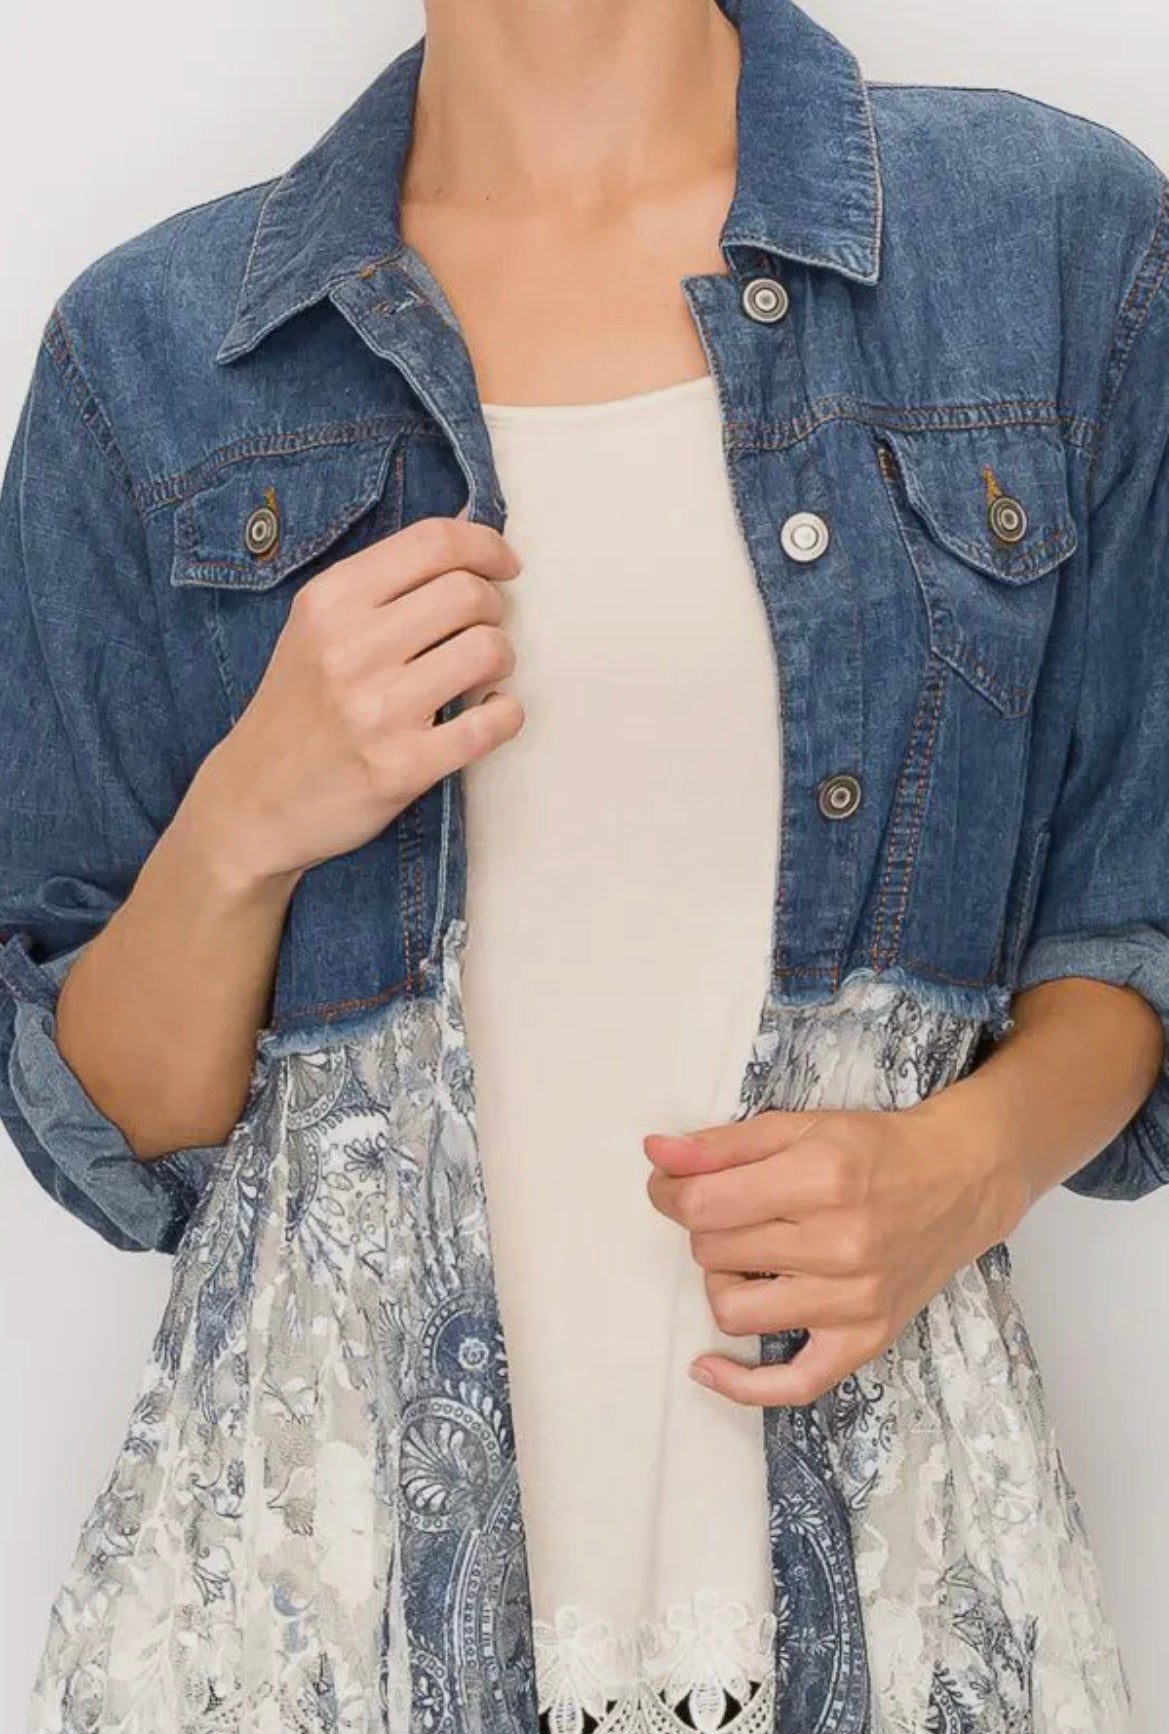 Lace and denim jacket